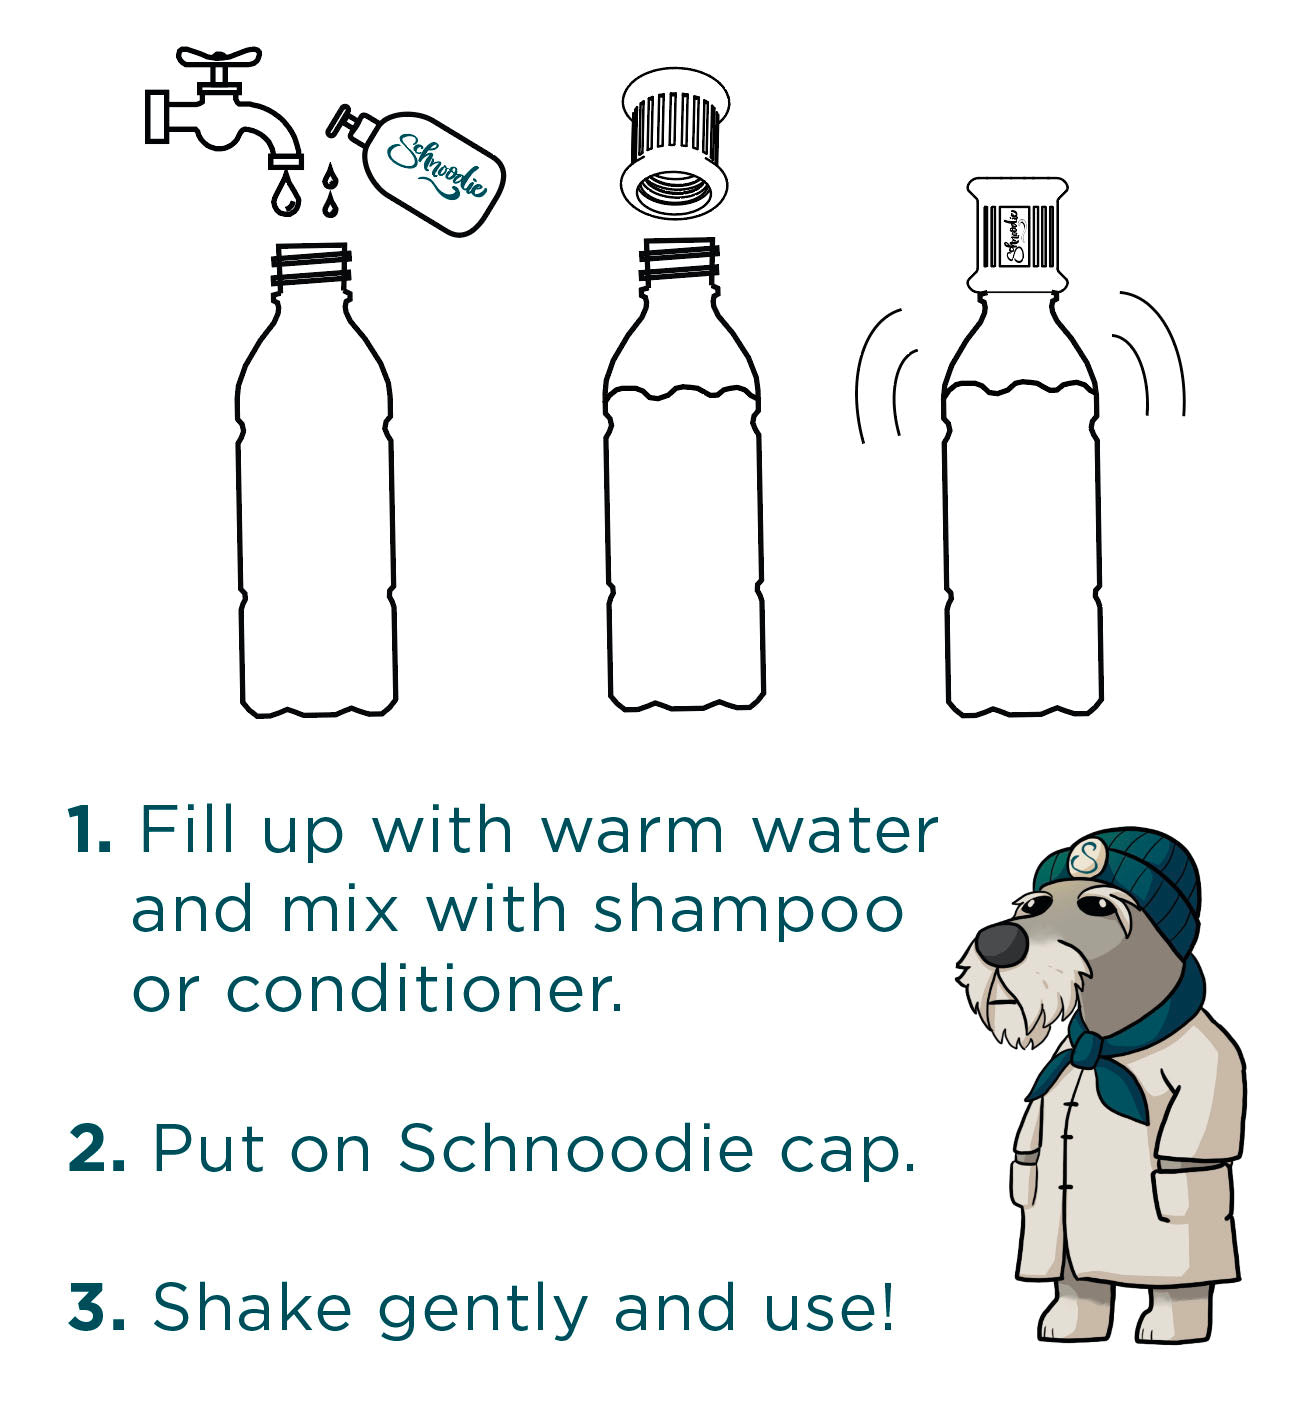 Dog Wash - concentrated and unscented shampoo